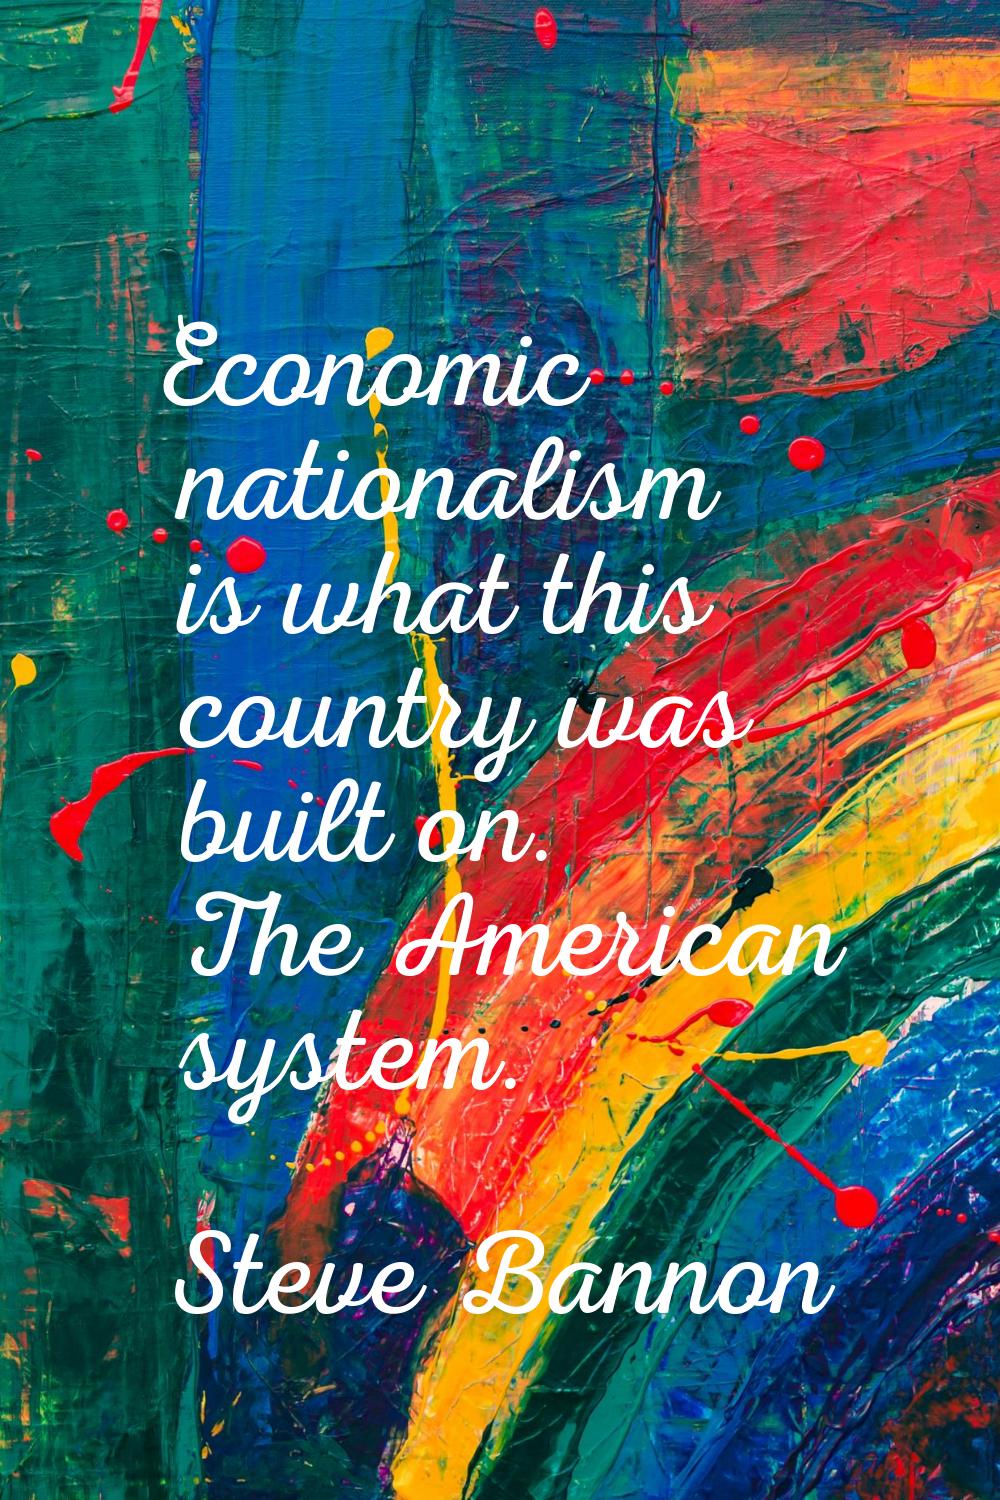 Economic nationalism is what this country was built on. The American system.